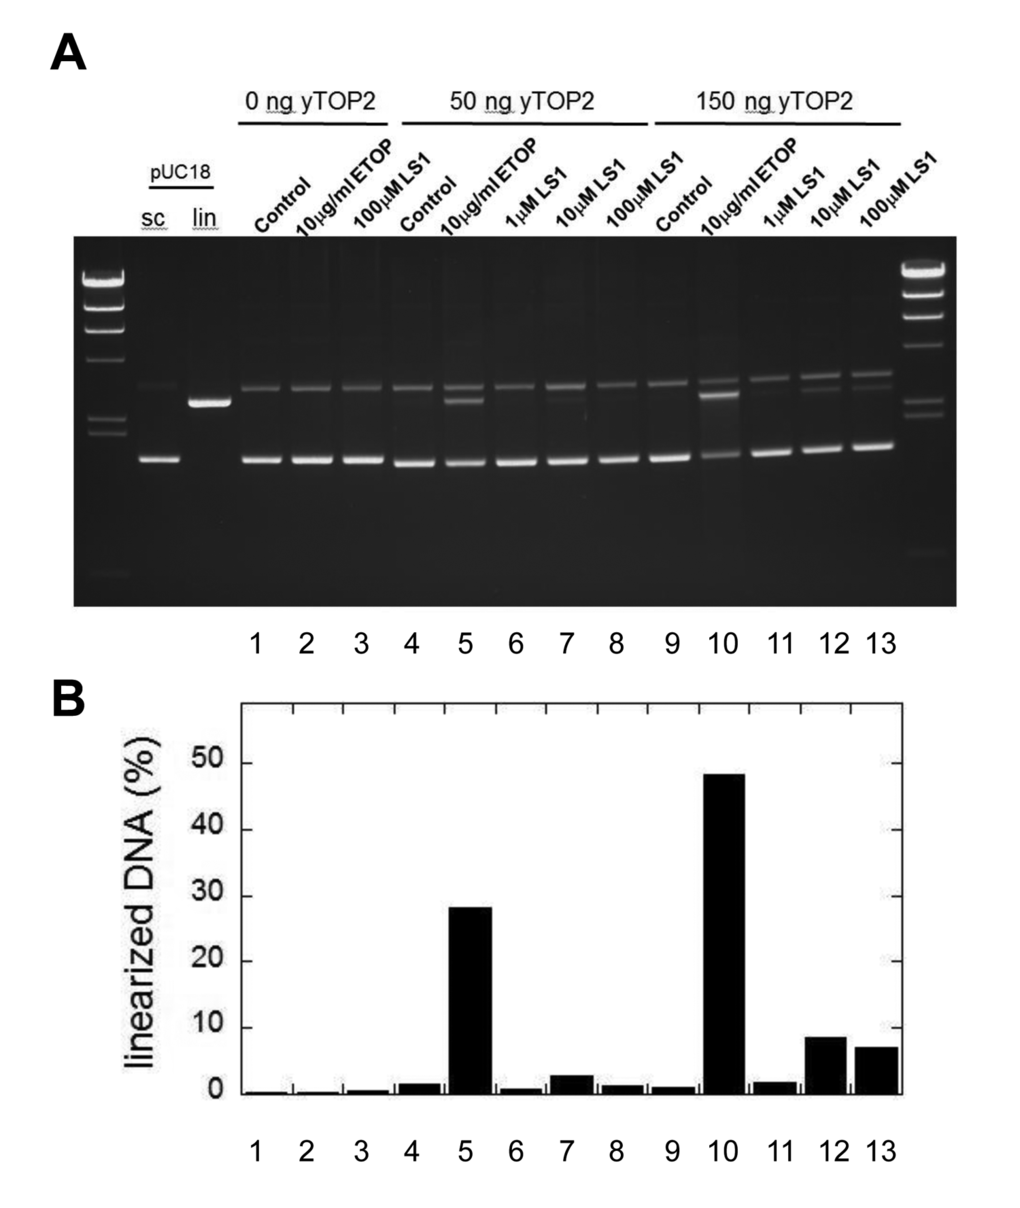 LS1 induces double strand breaks. (A) A pUC18 plasmid linearization assay was used to determine if LS1 is capable of promoting formation of Top2cc containing double strand breaks. Assays were performed as described in Materials and Methods. (B) Percent linearized DNA quantified with GelQuant.NET 1.8.2 software.